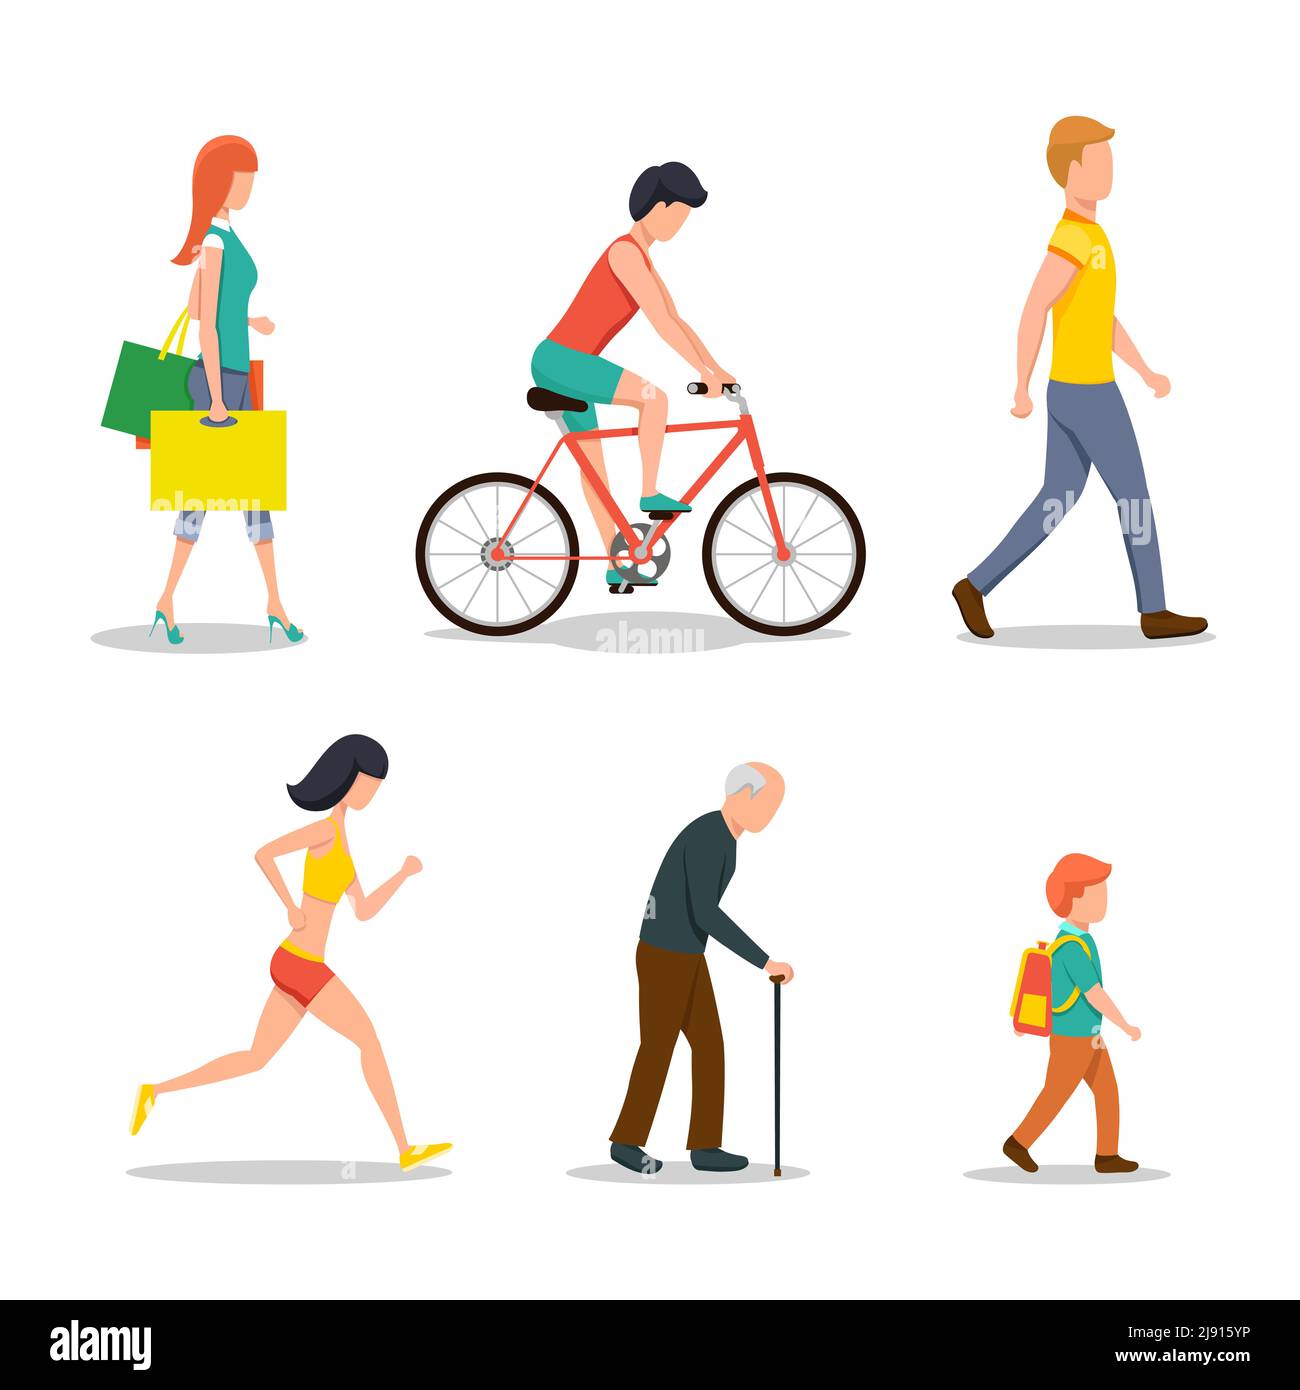 People on street in flat style design Stock Vector